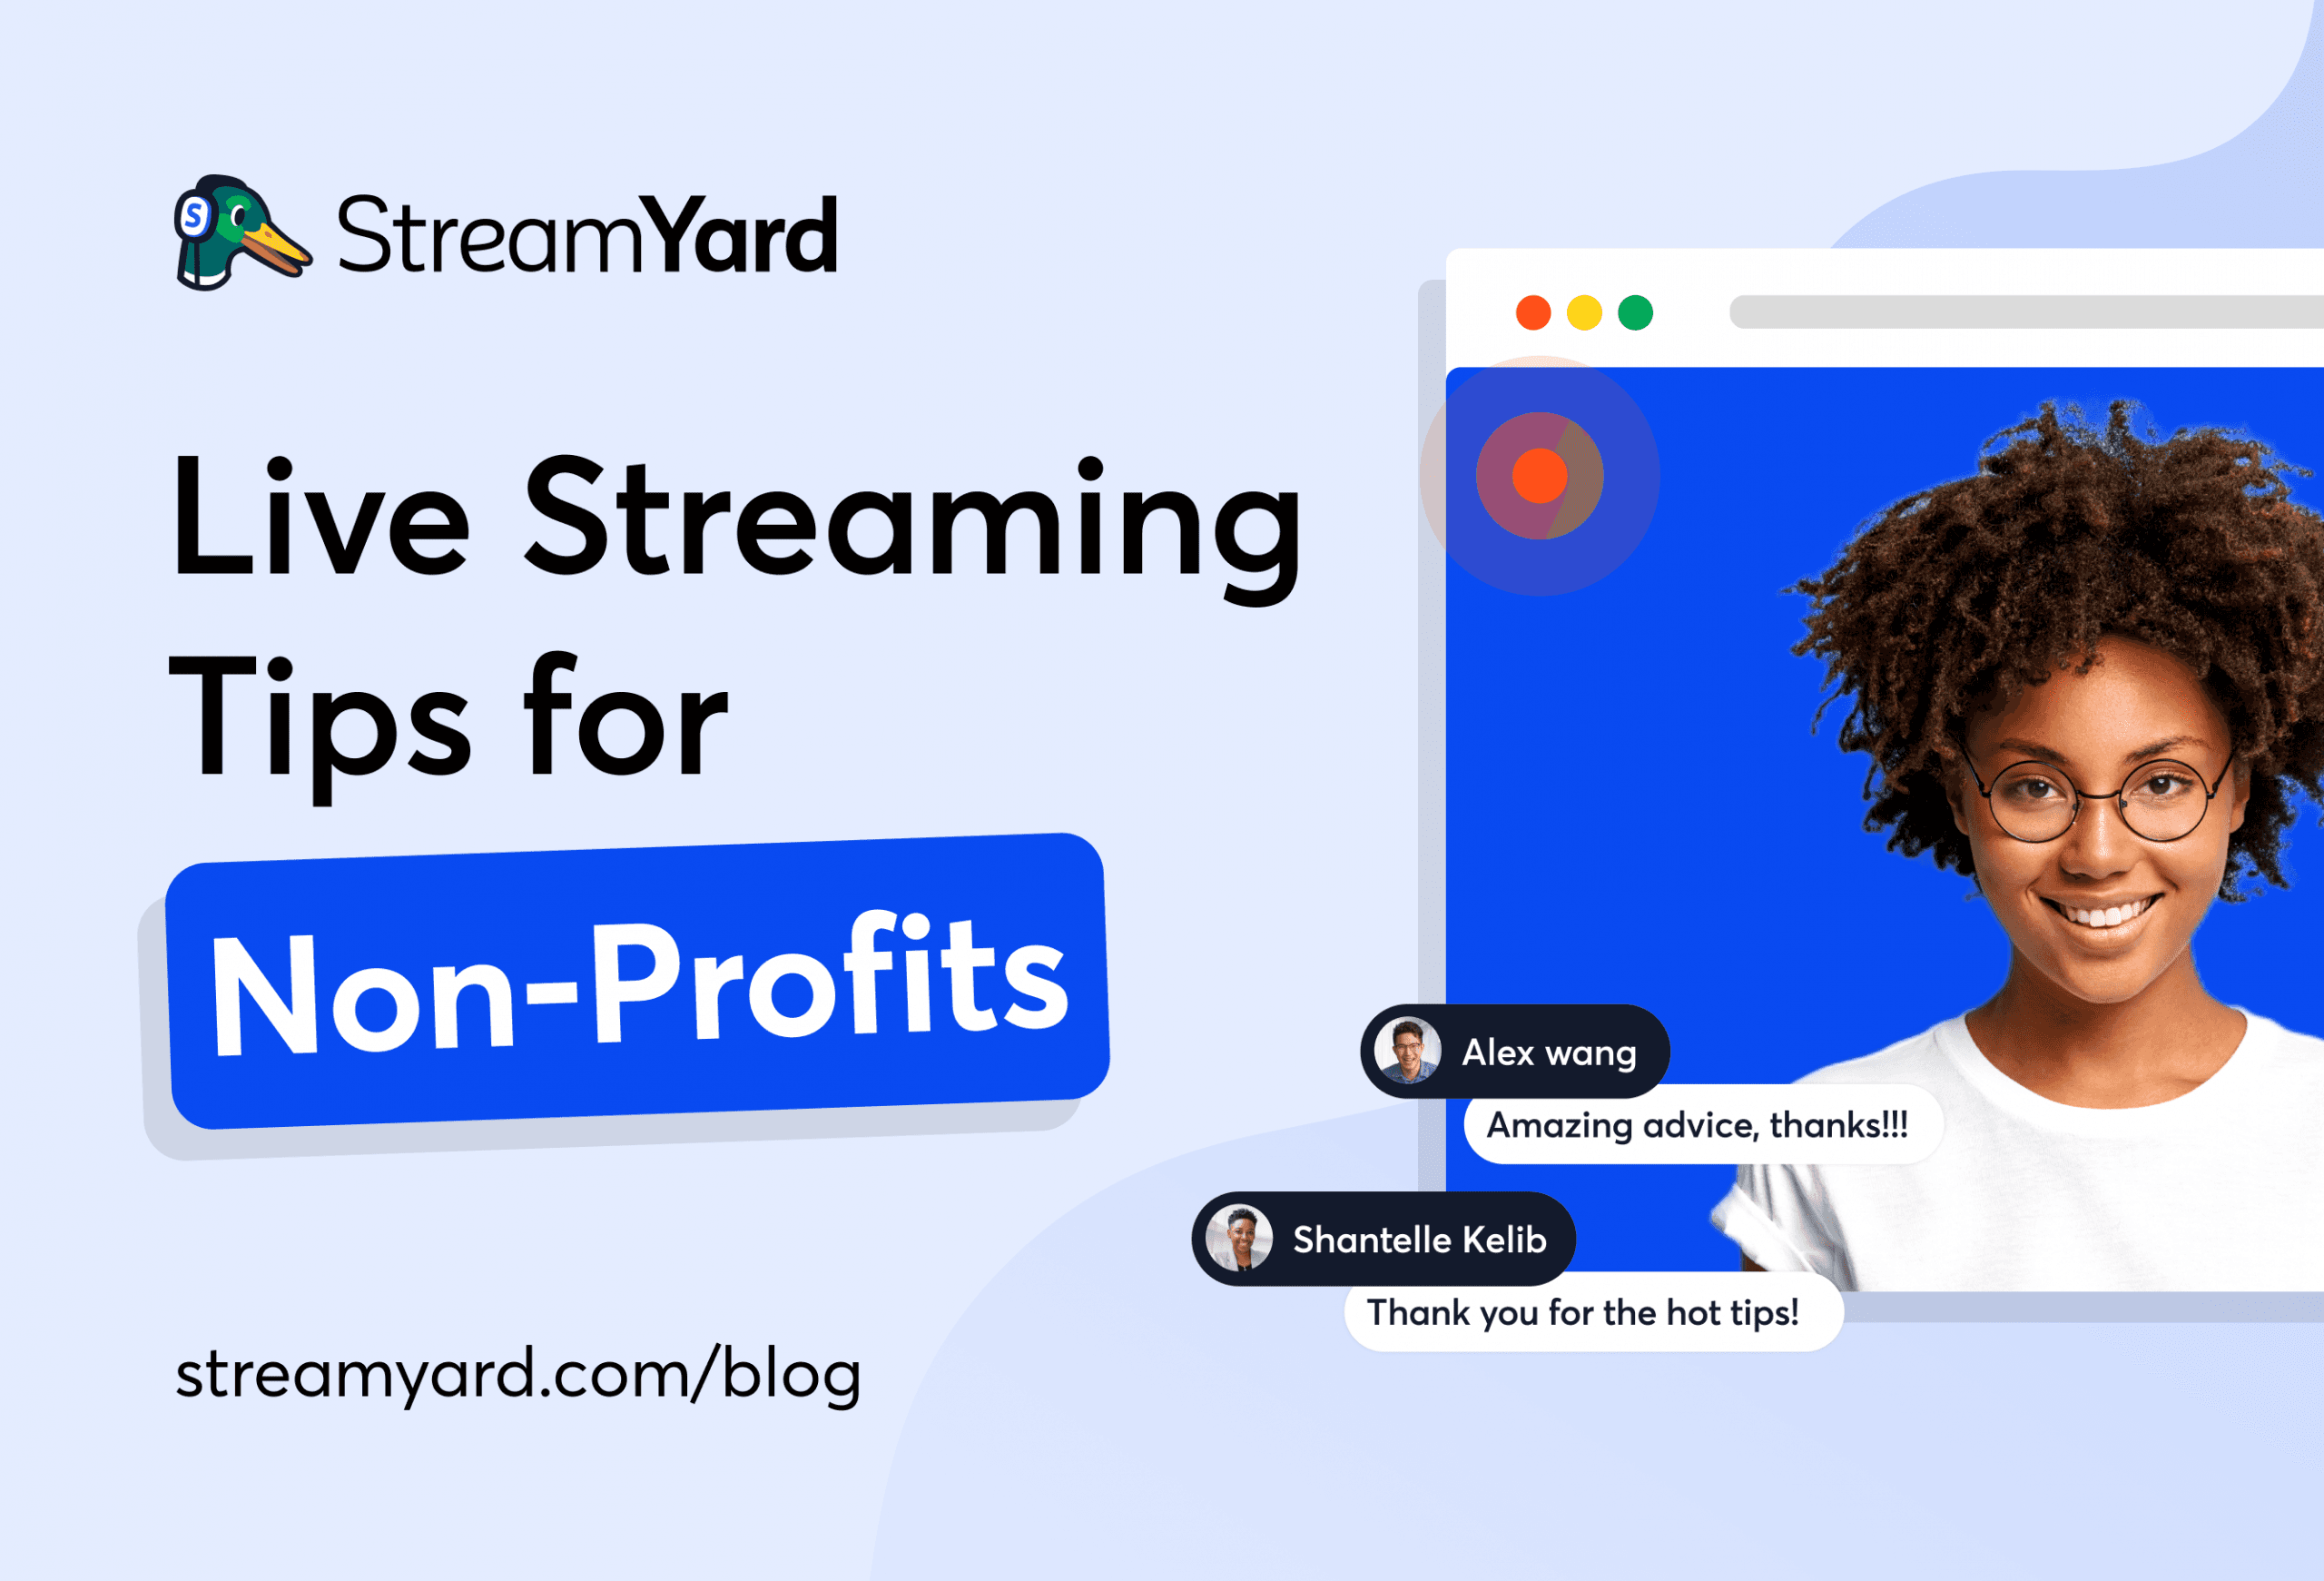 Learn how to use live streaming for nonprofits to raise money and awareness, while attracting new supporters and engaging existing ones.